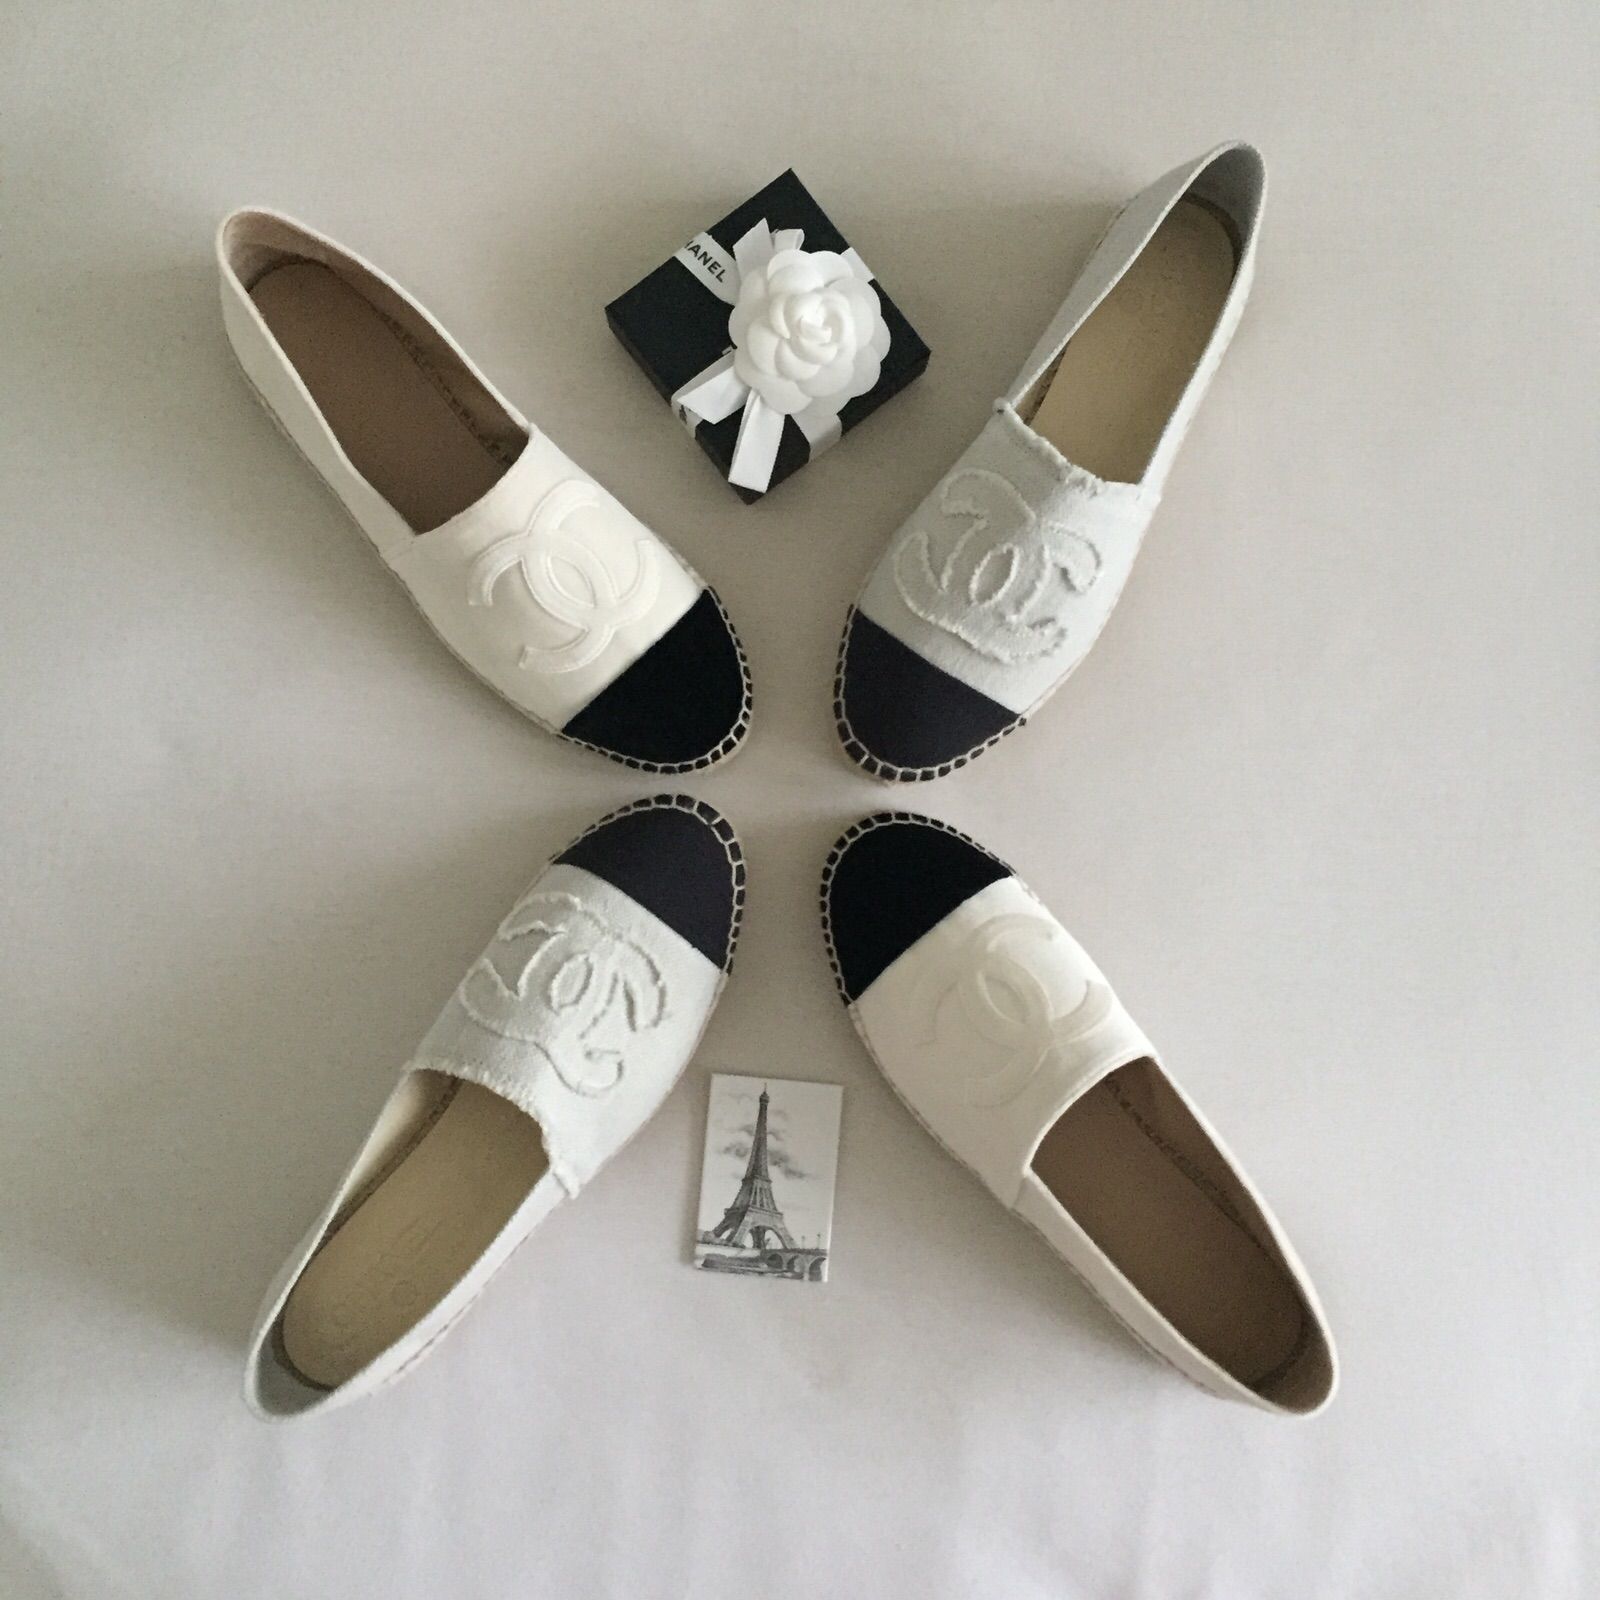 Sold at Auction: Chanel, Chanel Espadrilles Lambskin Camellia Shoes Size 37